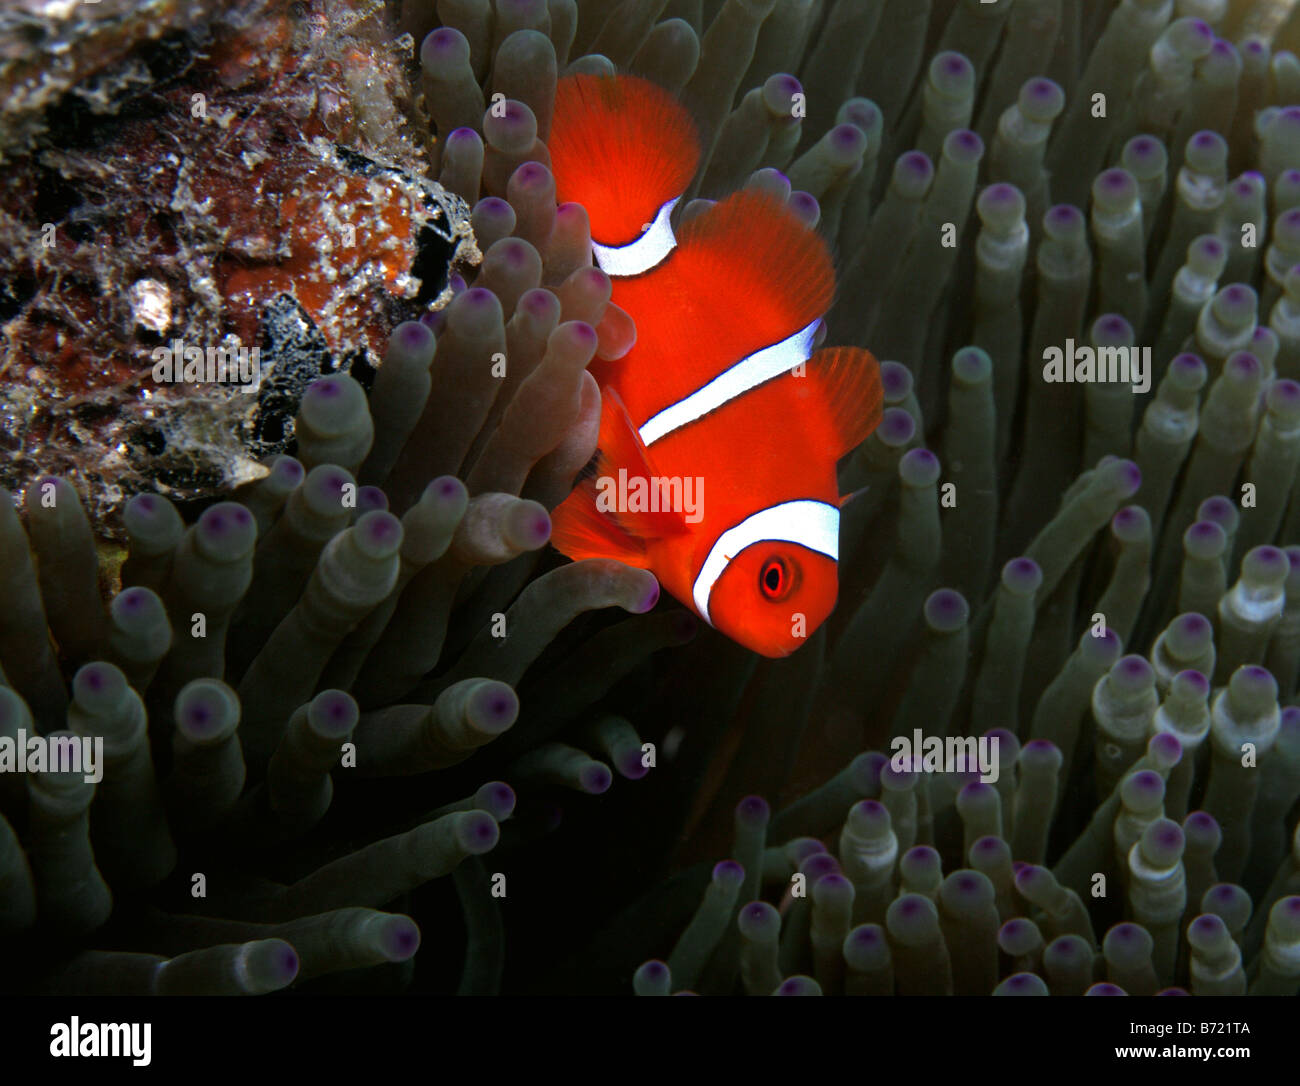 Spinecheek Anemonefish amphiprion rubrocinctus in anemone in indo pacific Stock Photo